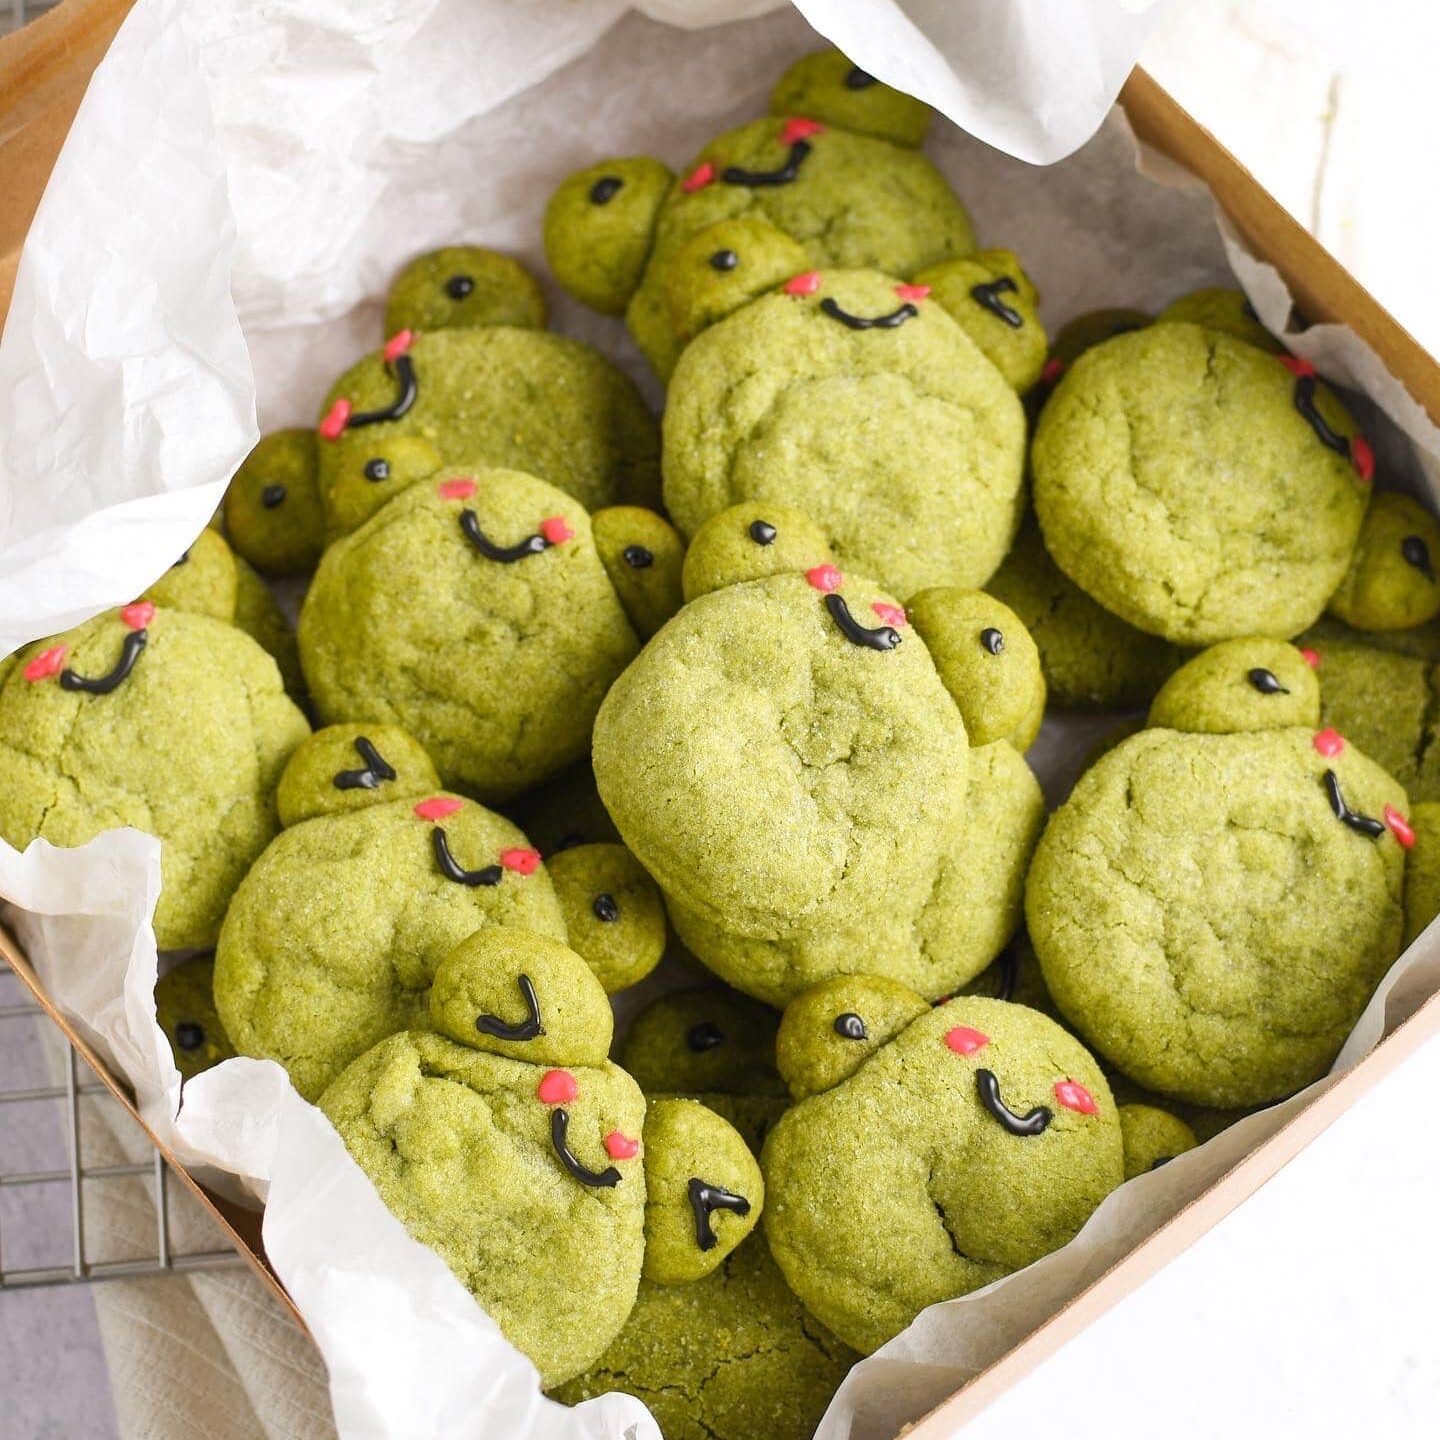 cute matcha frog cookies in a box. shot using my beginner food photography gear, Nikon d3500 and 35 mm f/1.8.